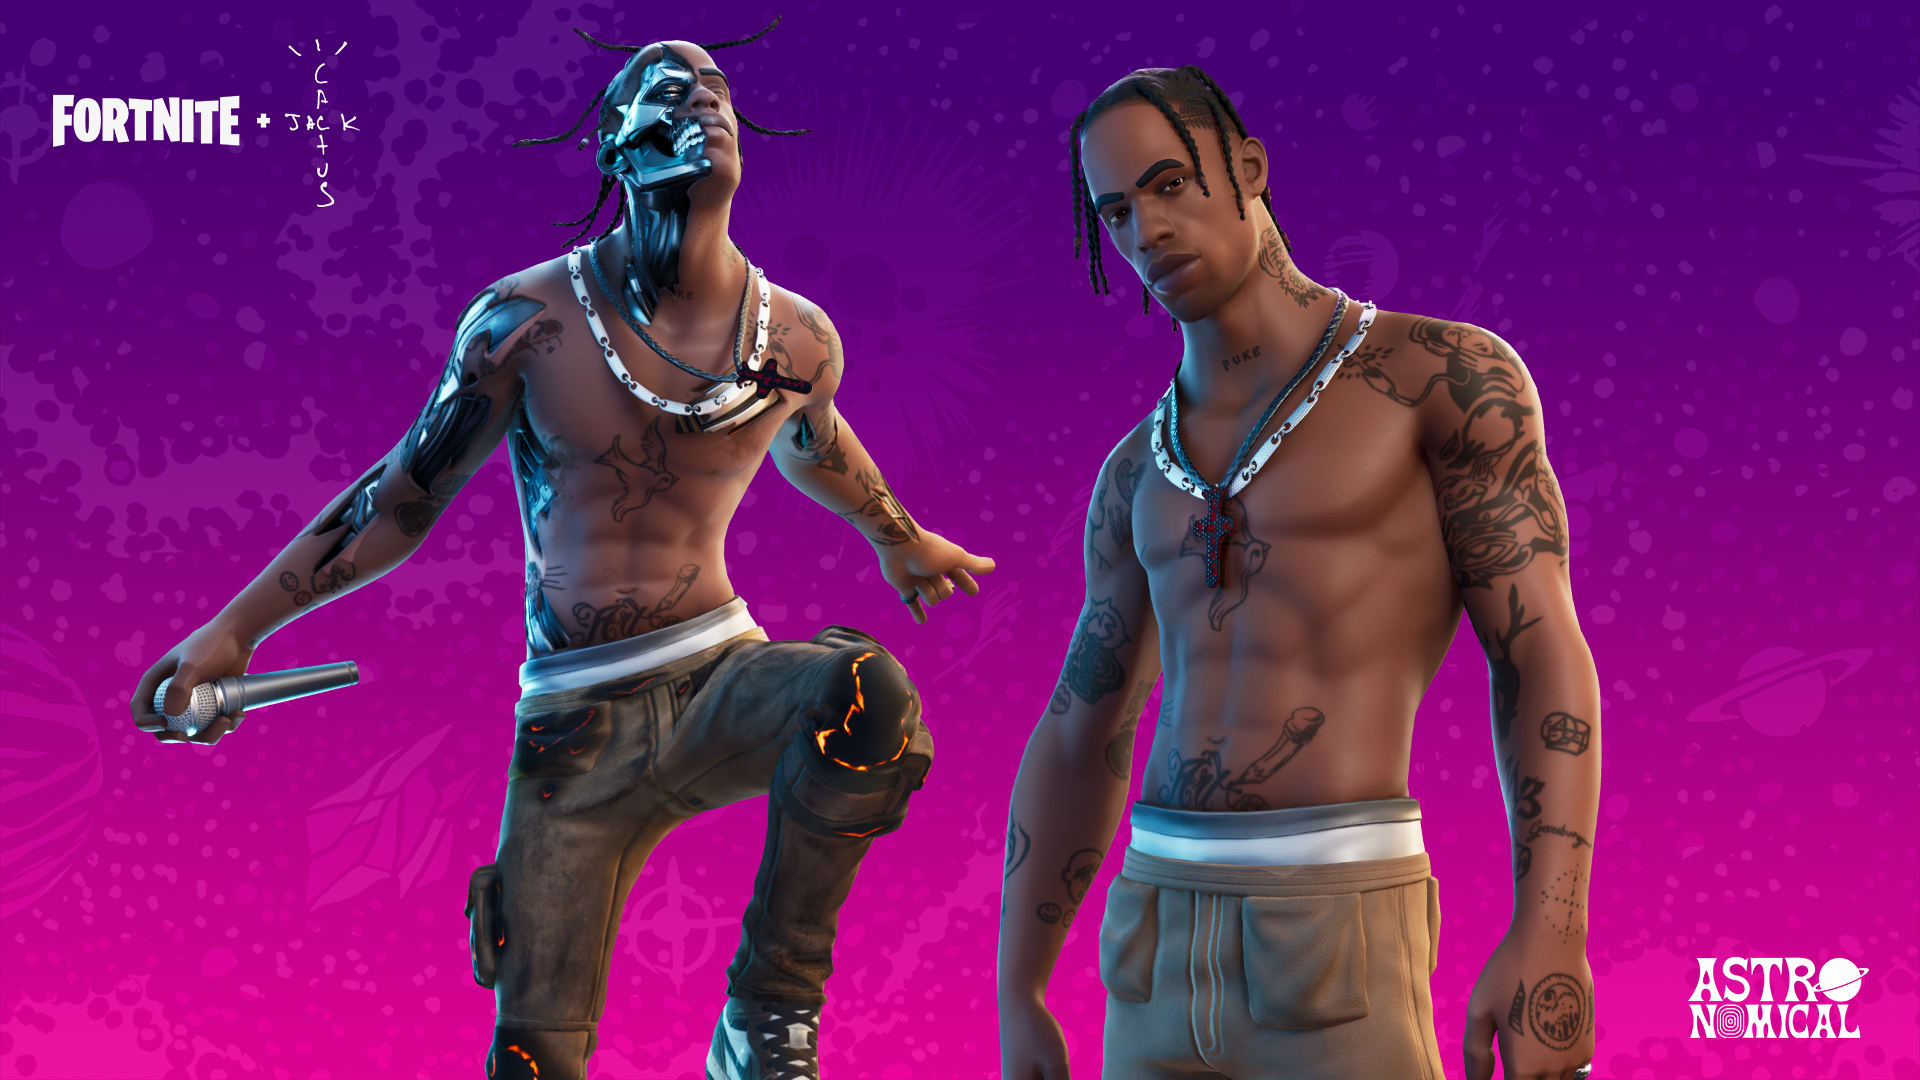 Fortnite hosted a psychedelic Travis Scott concert and 12.3M people watched